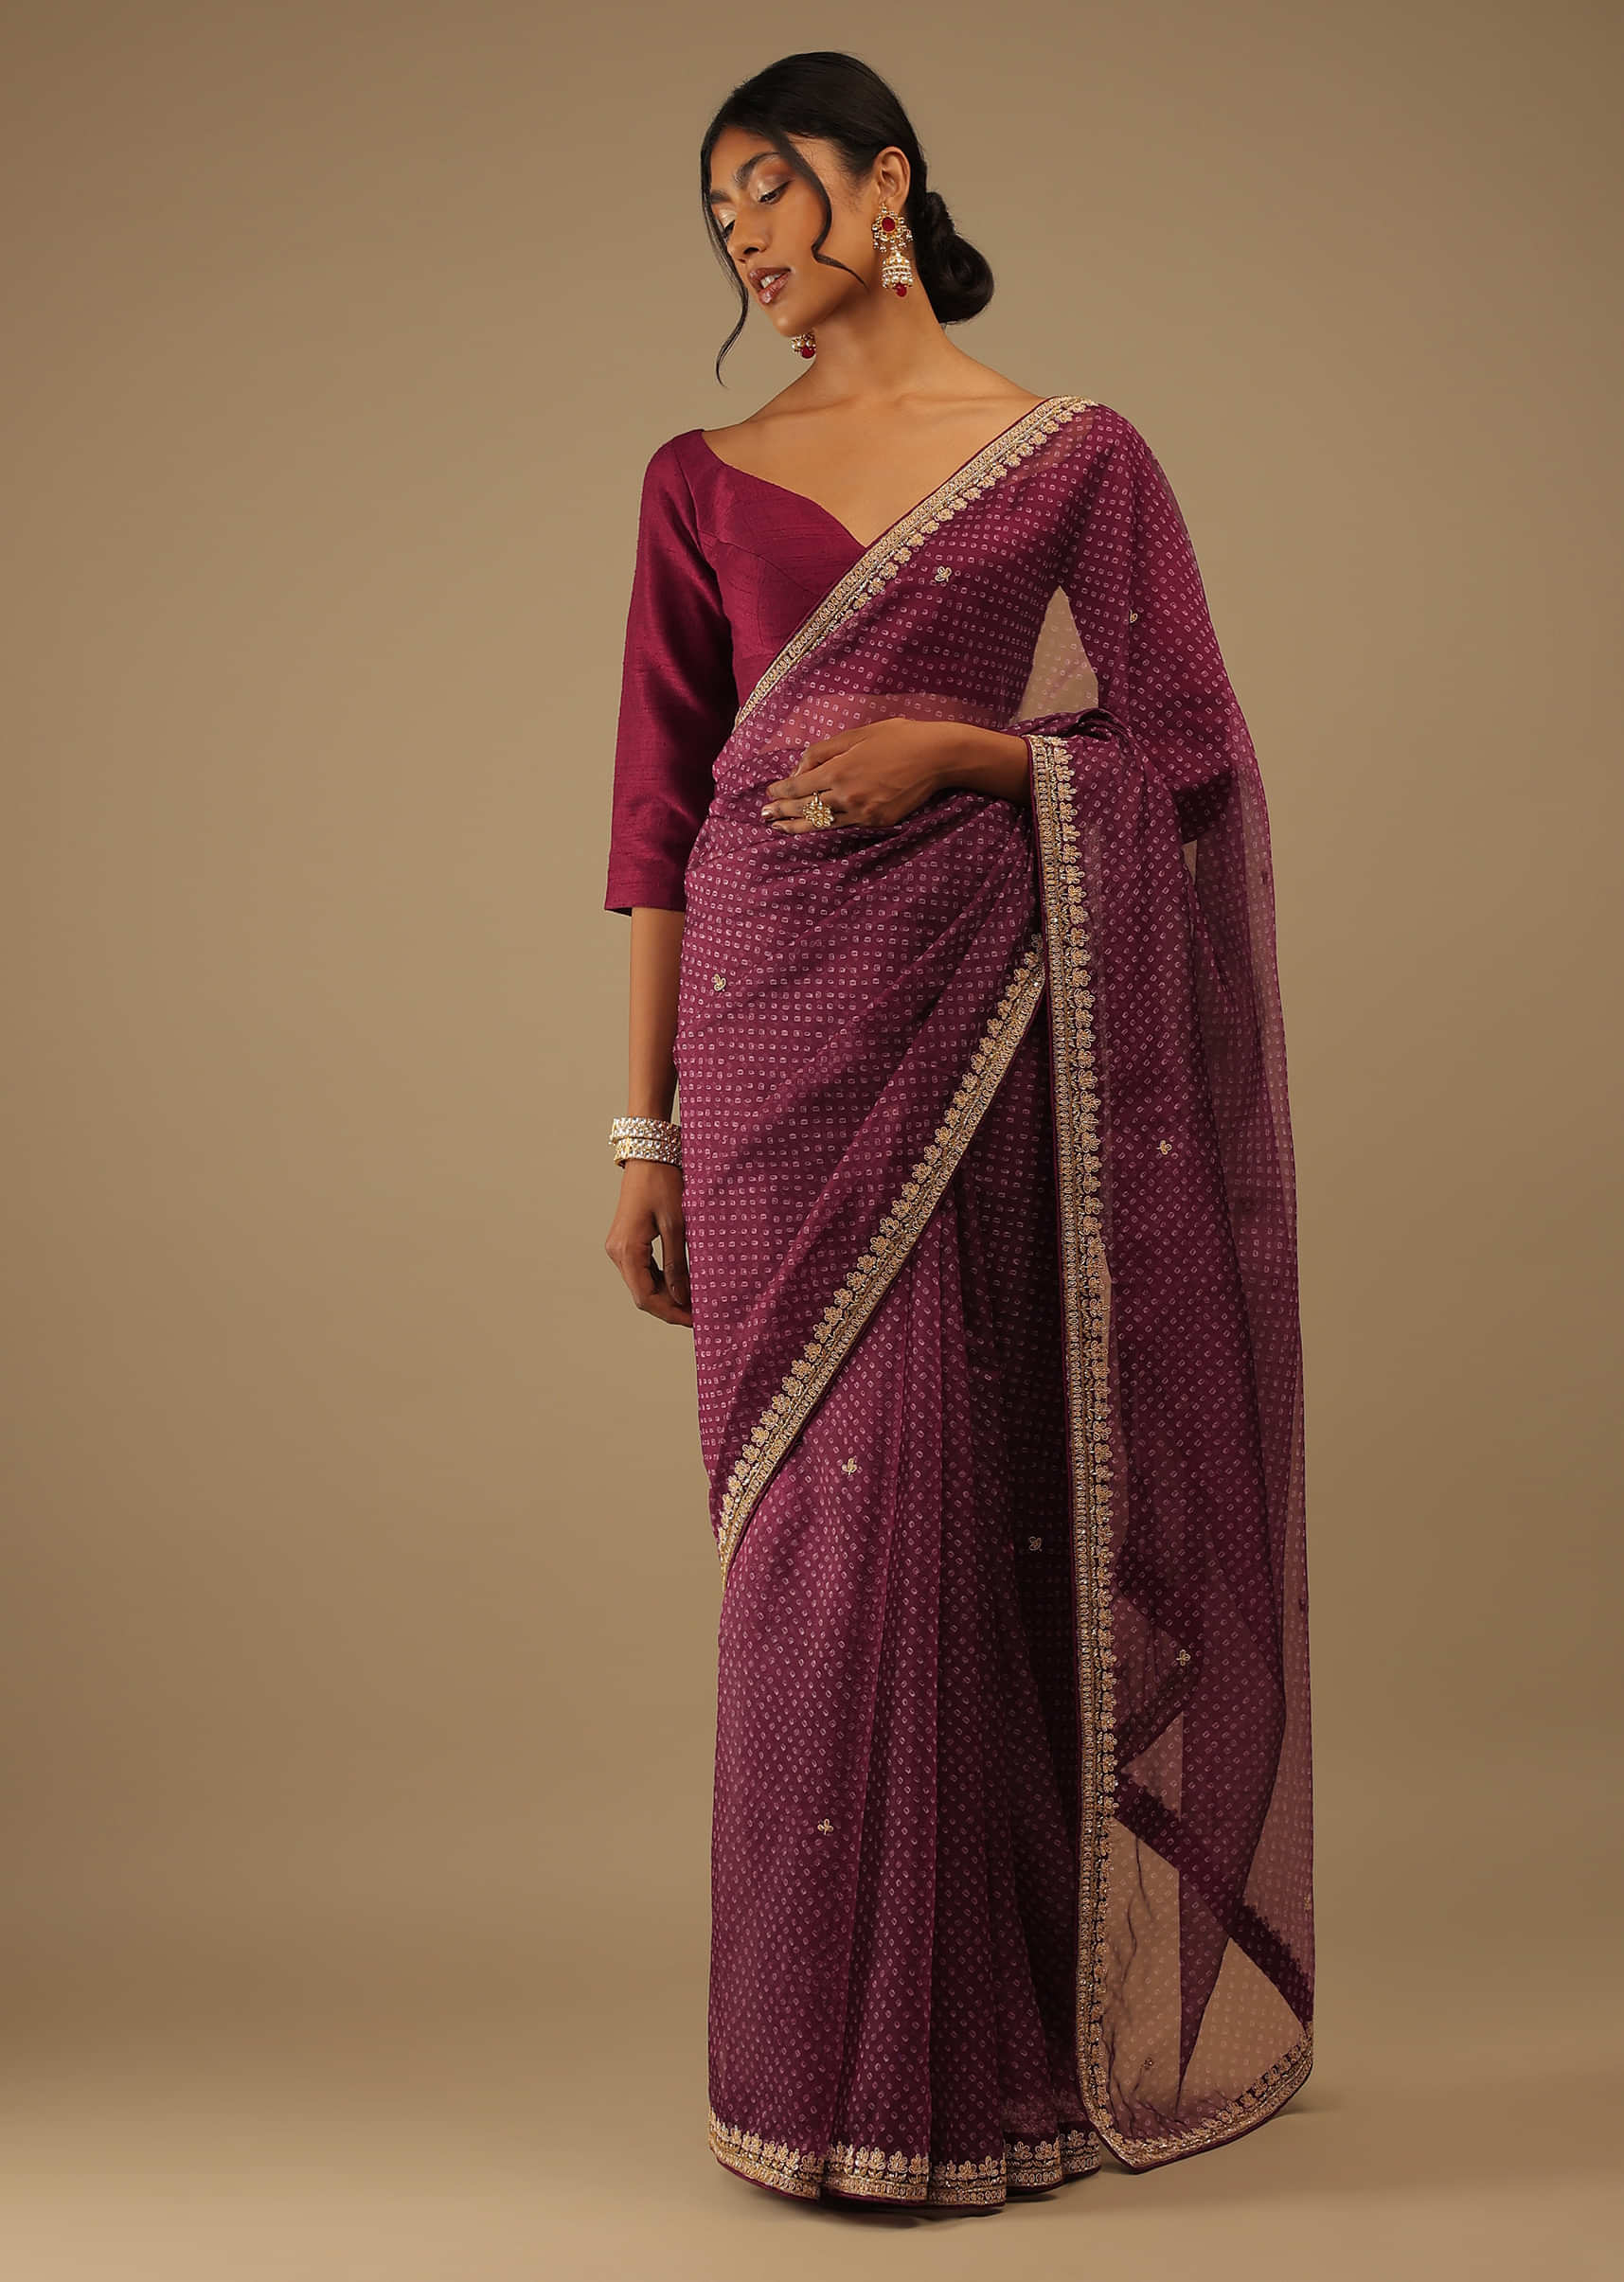 Grape Juice Saree In Digital Bandhani Print, Crafted In Organza In Sequins And Cut Dana Floral Butti Embroidery, Crafted In Organza With Cut Dana Floral Embroidery Buttis